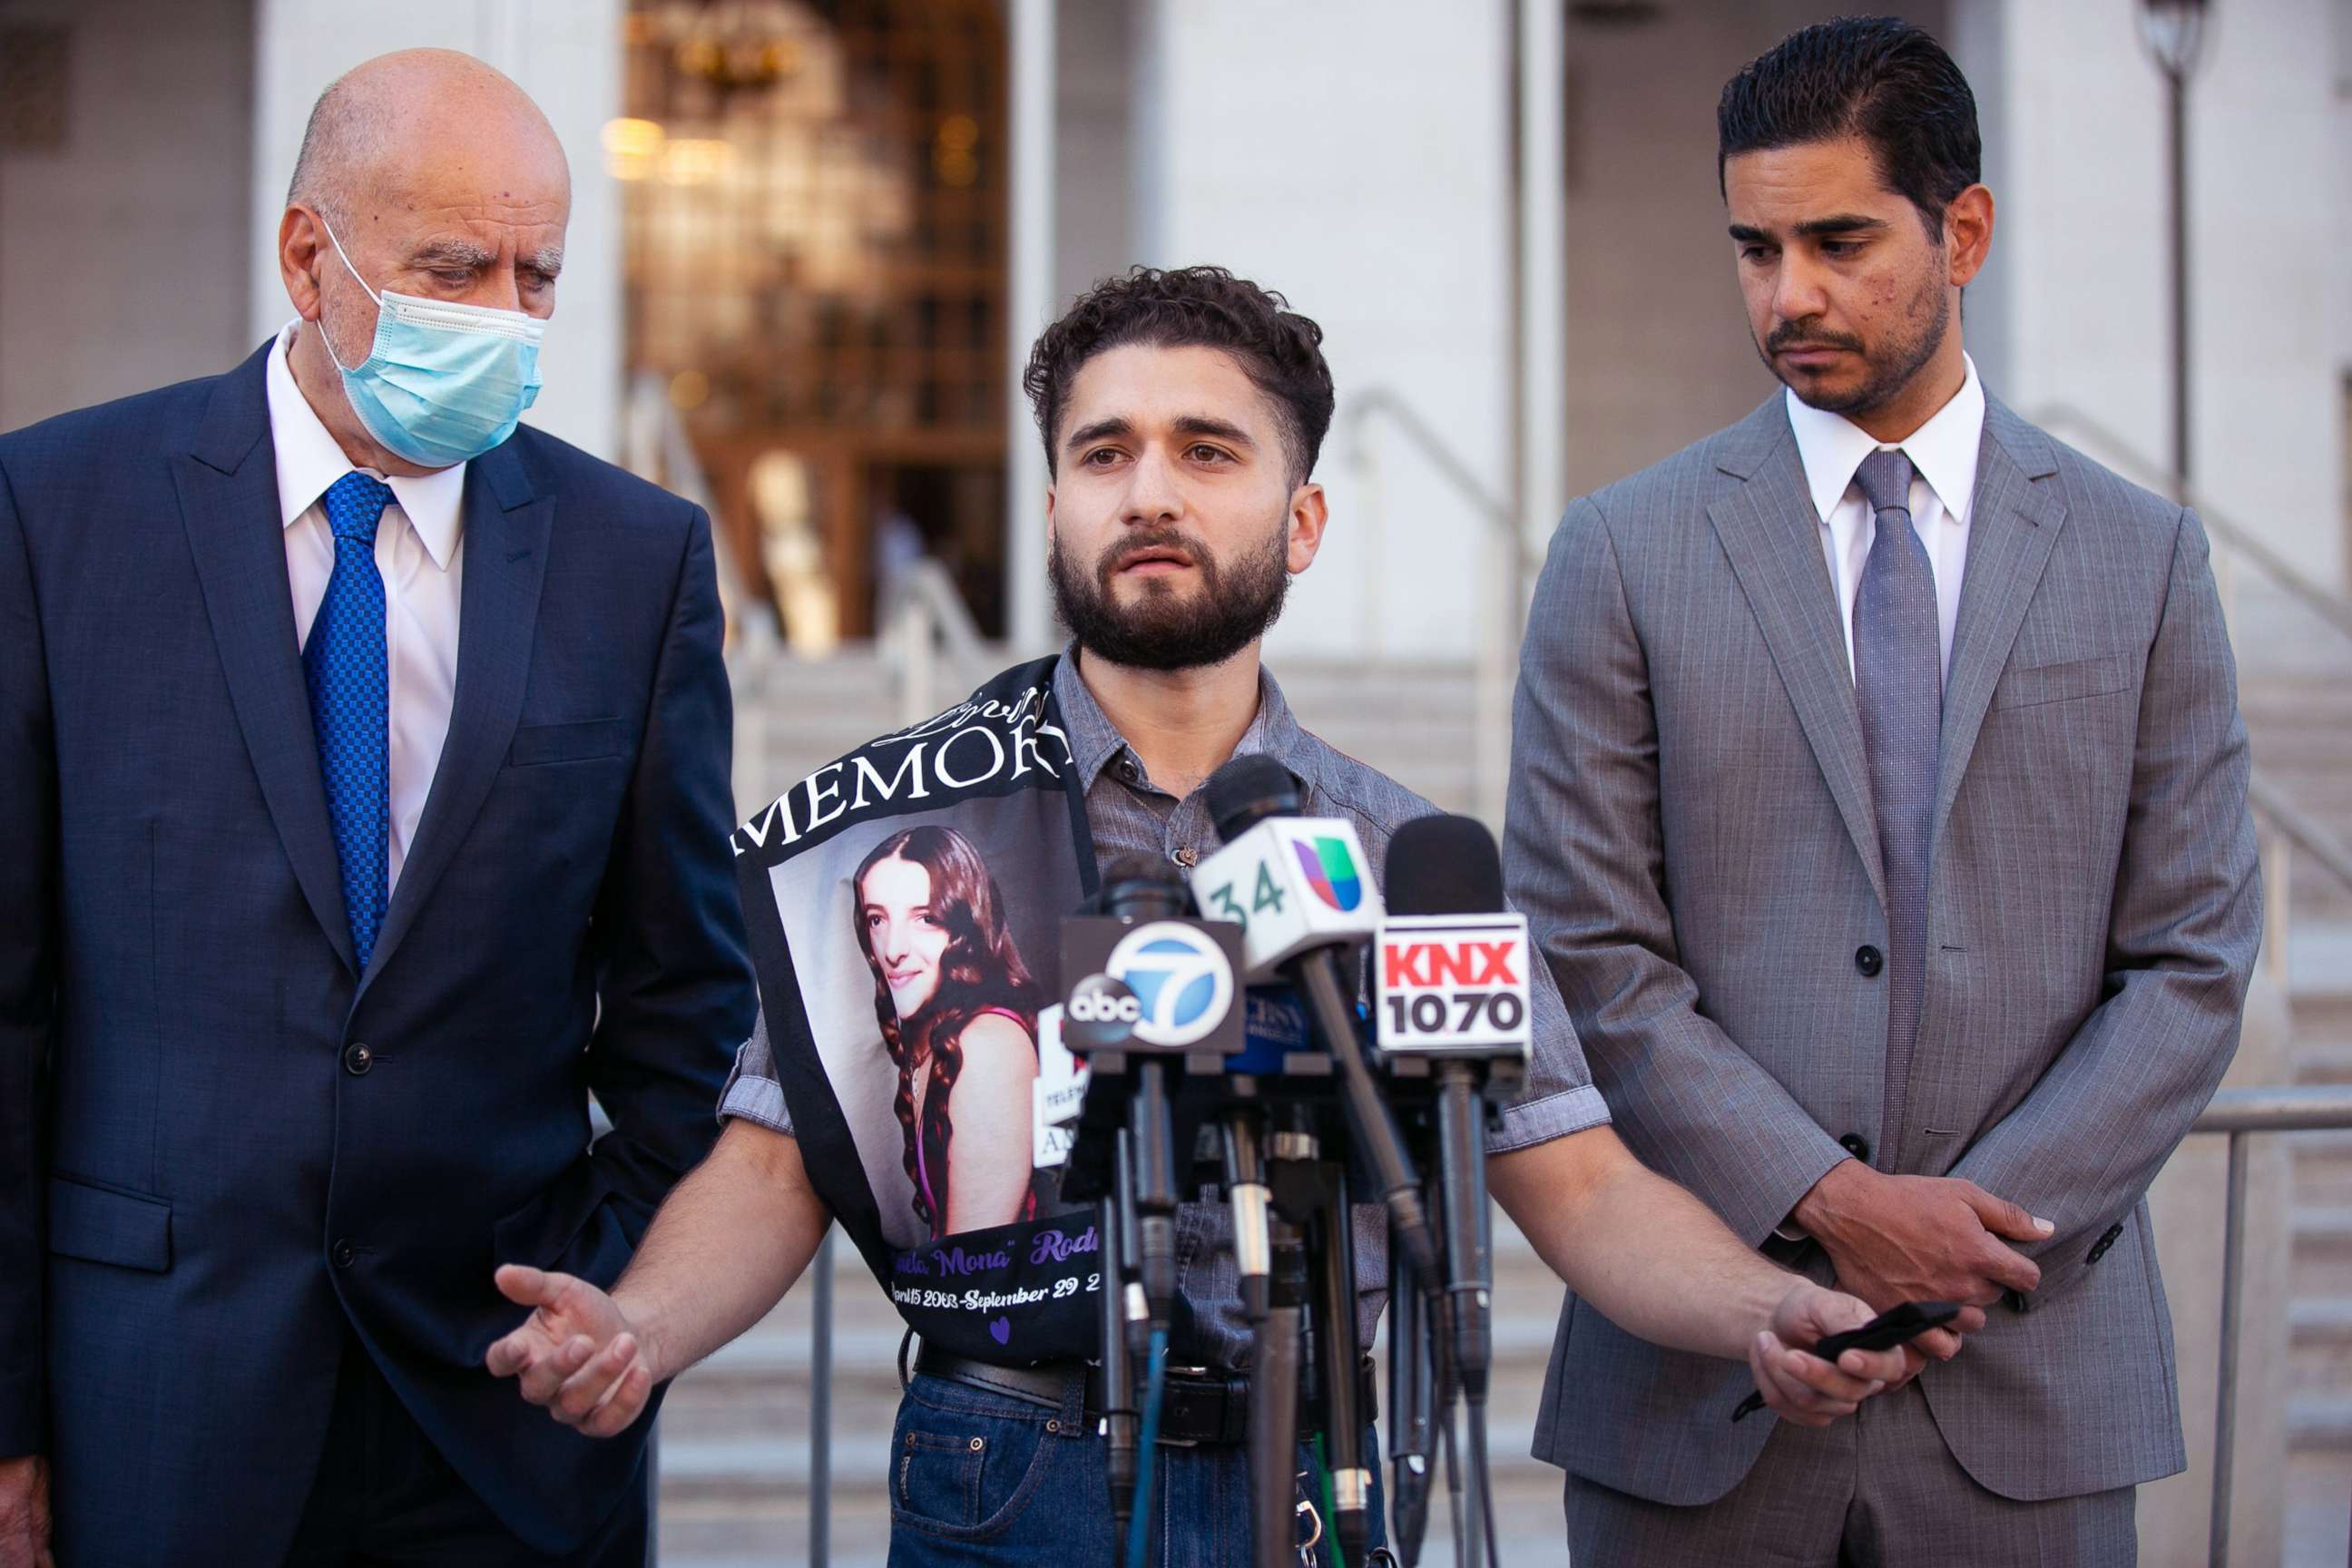 PHOTO: Oscar Rodriguez, the brother of 18-year-old Mona Rodriguez, who was shot by a Long Beach Unified School District safety officer, joined the family's attorneys, speaks to the press, Oct. 27, 2021 in Los Angeles.